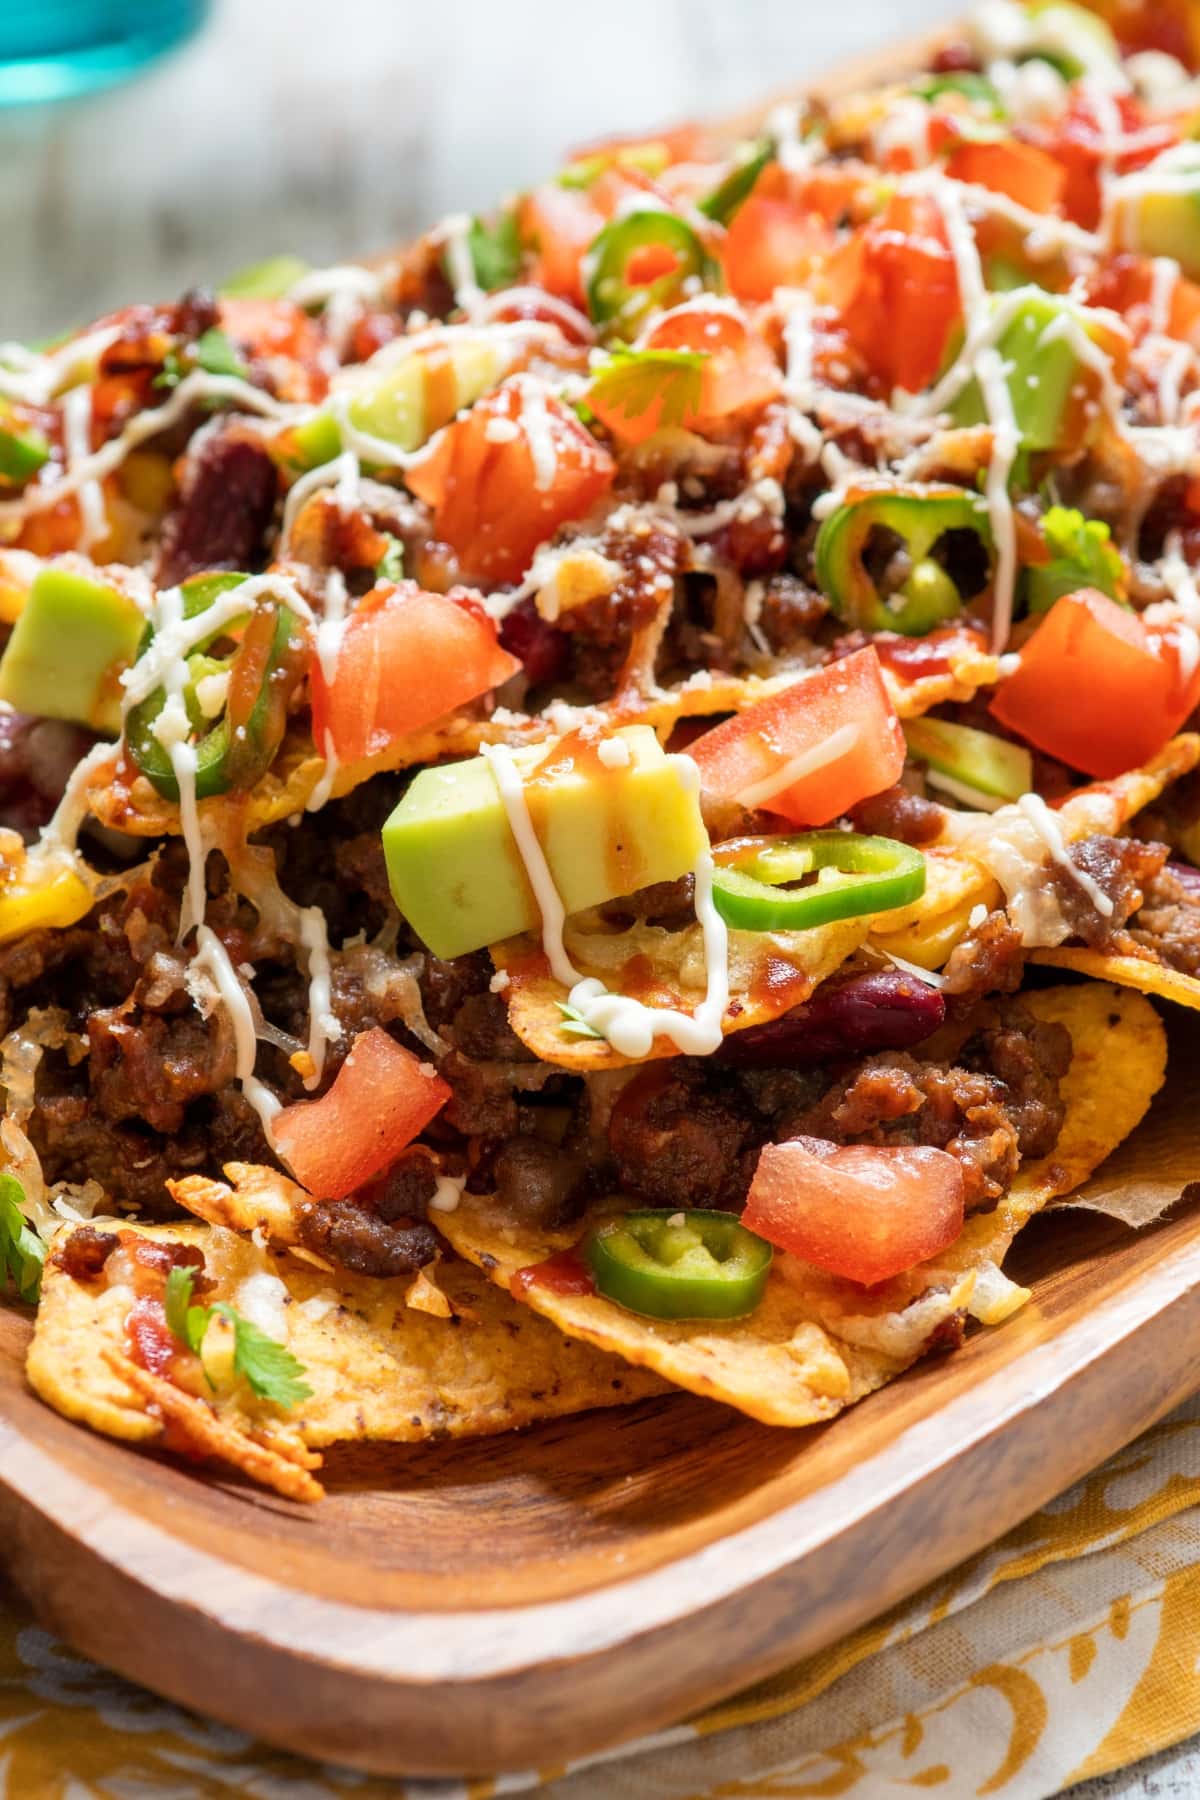 Tasty Nachos with Avocados, Pepper and Tomatoes